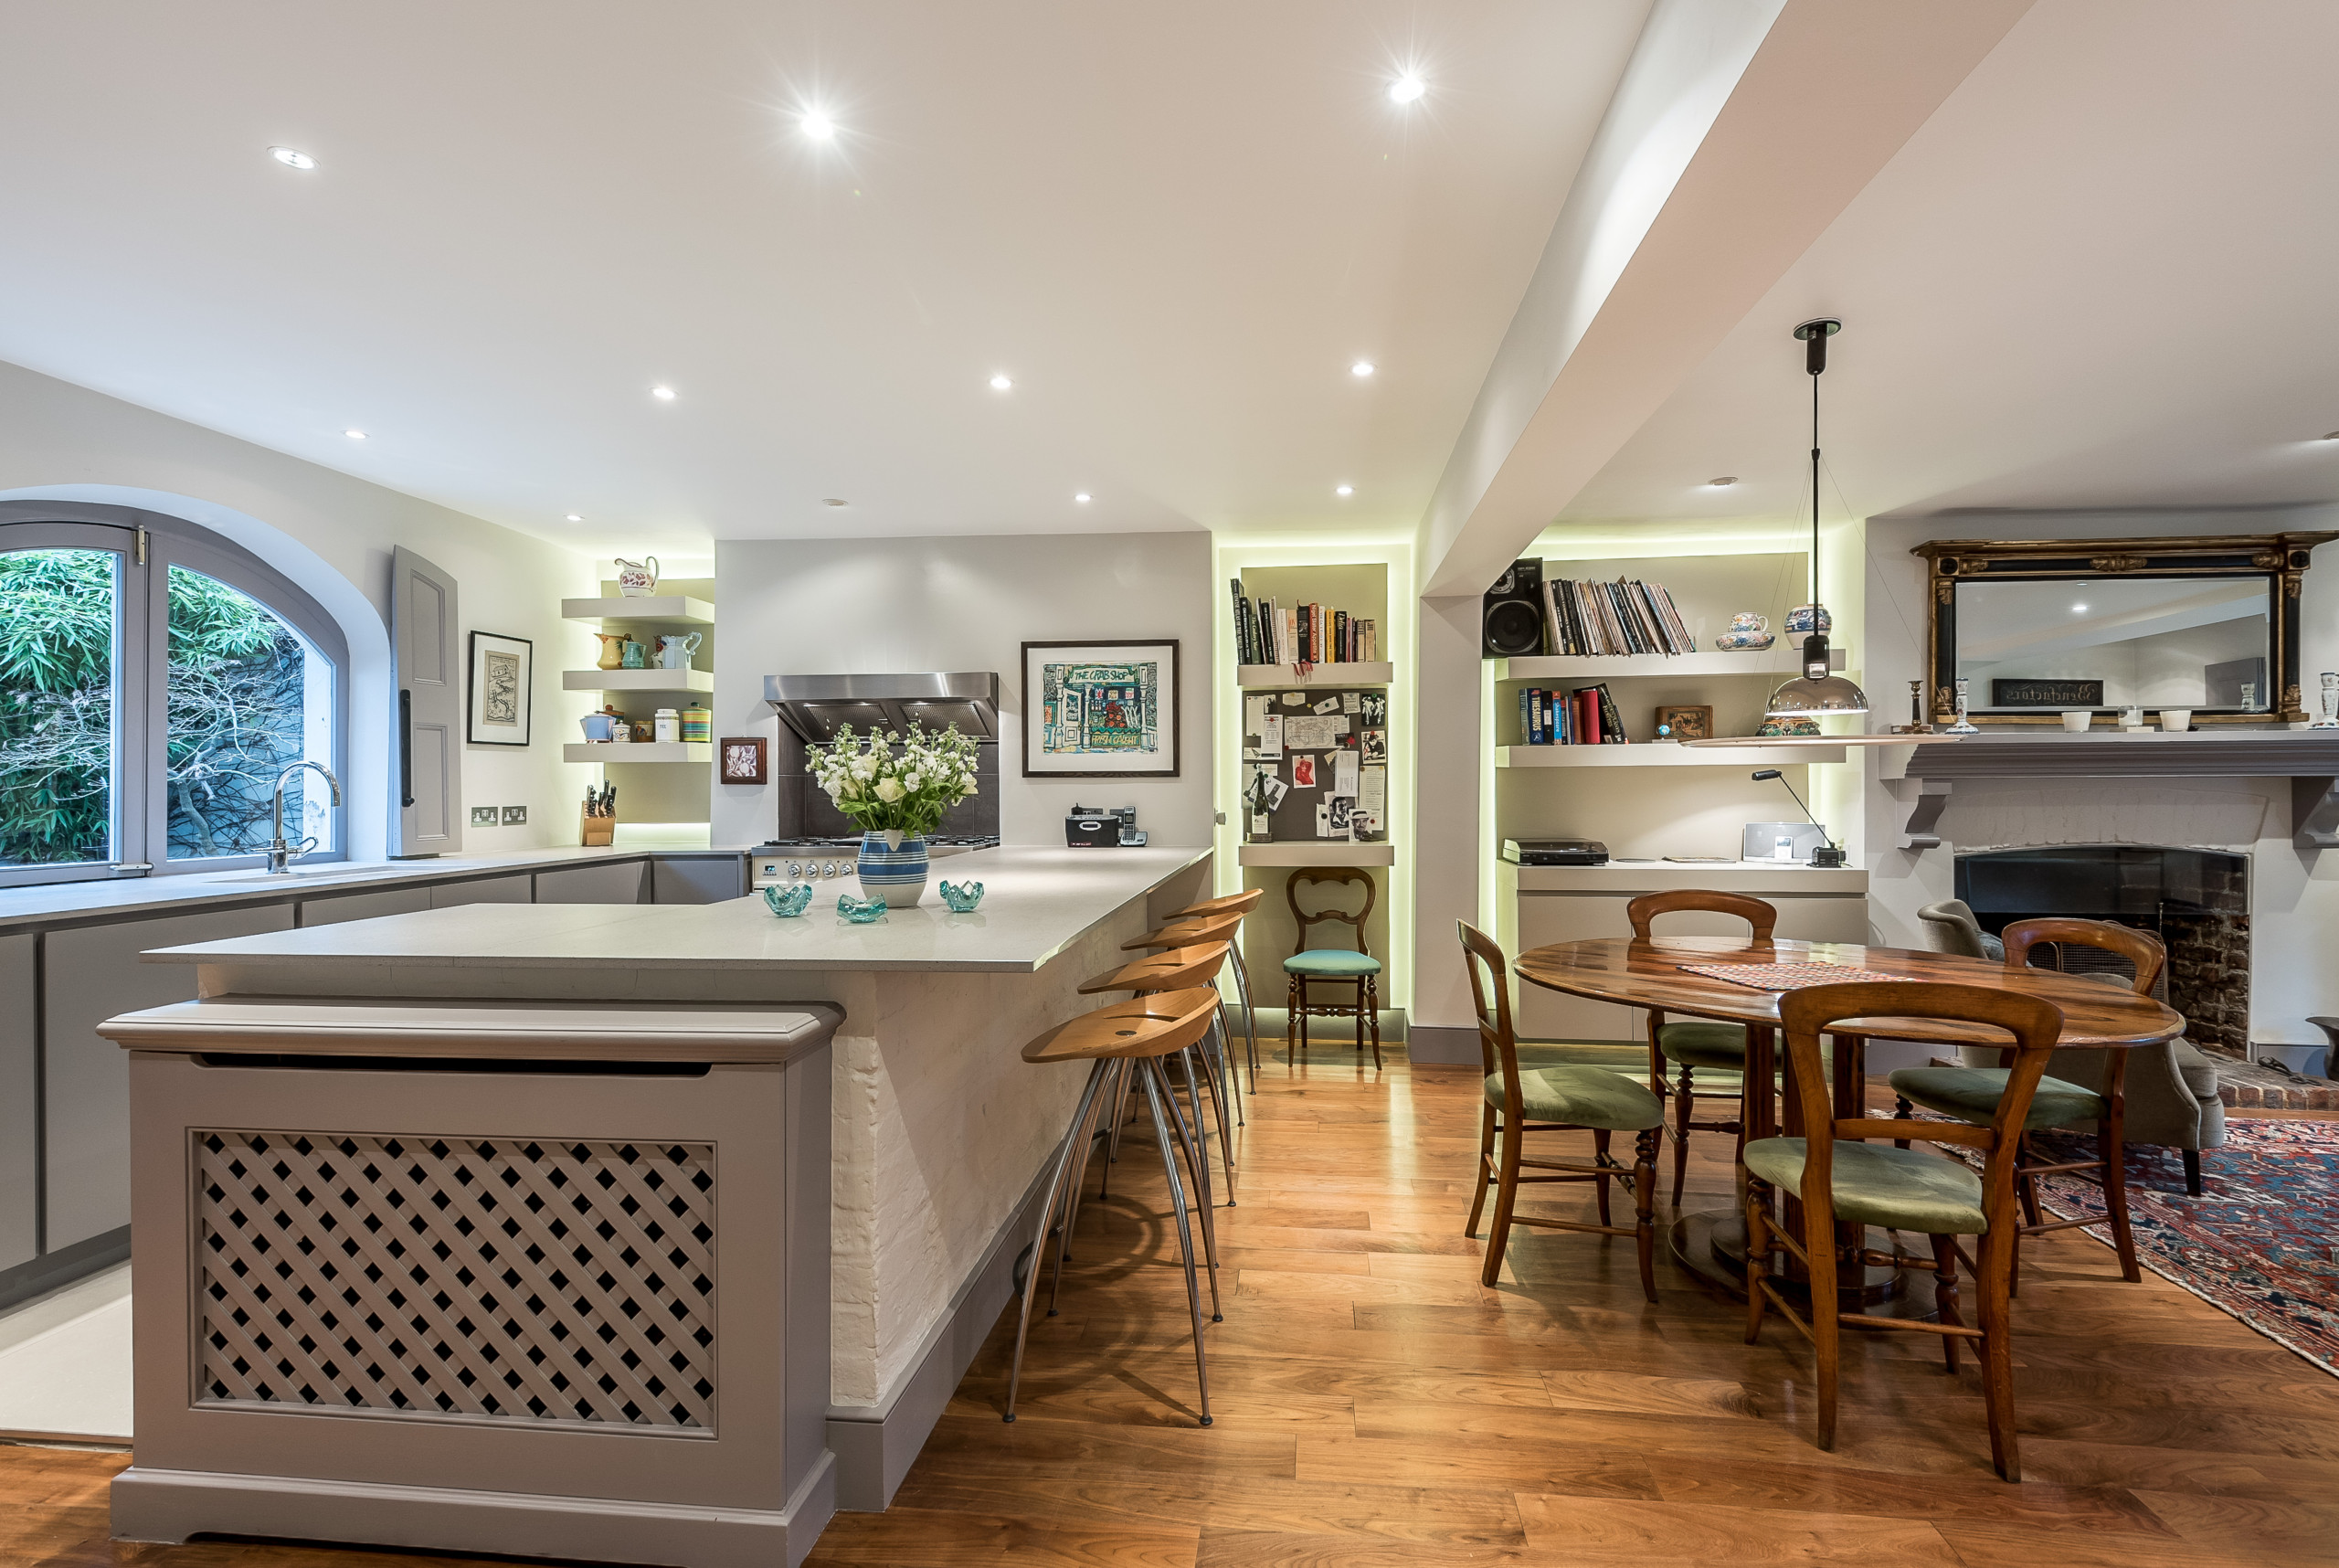 An Eclectic Open Plan Space Perfect for a Family Evening